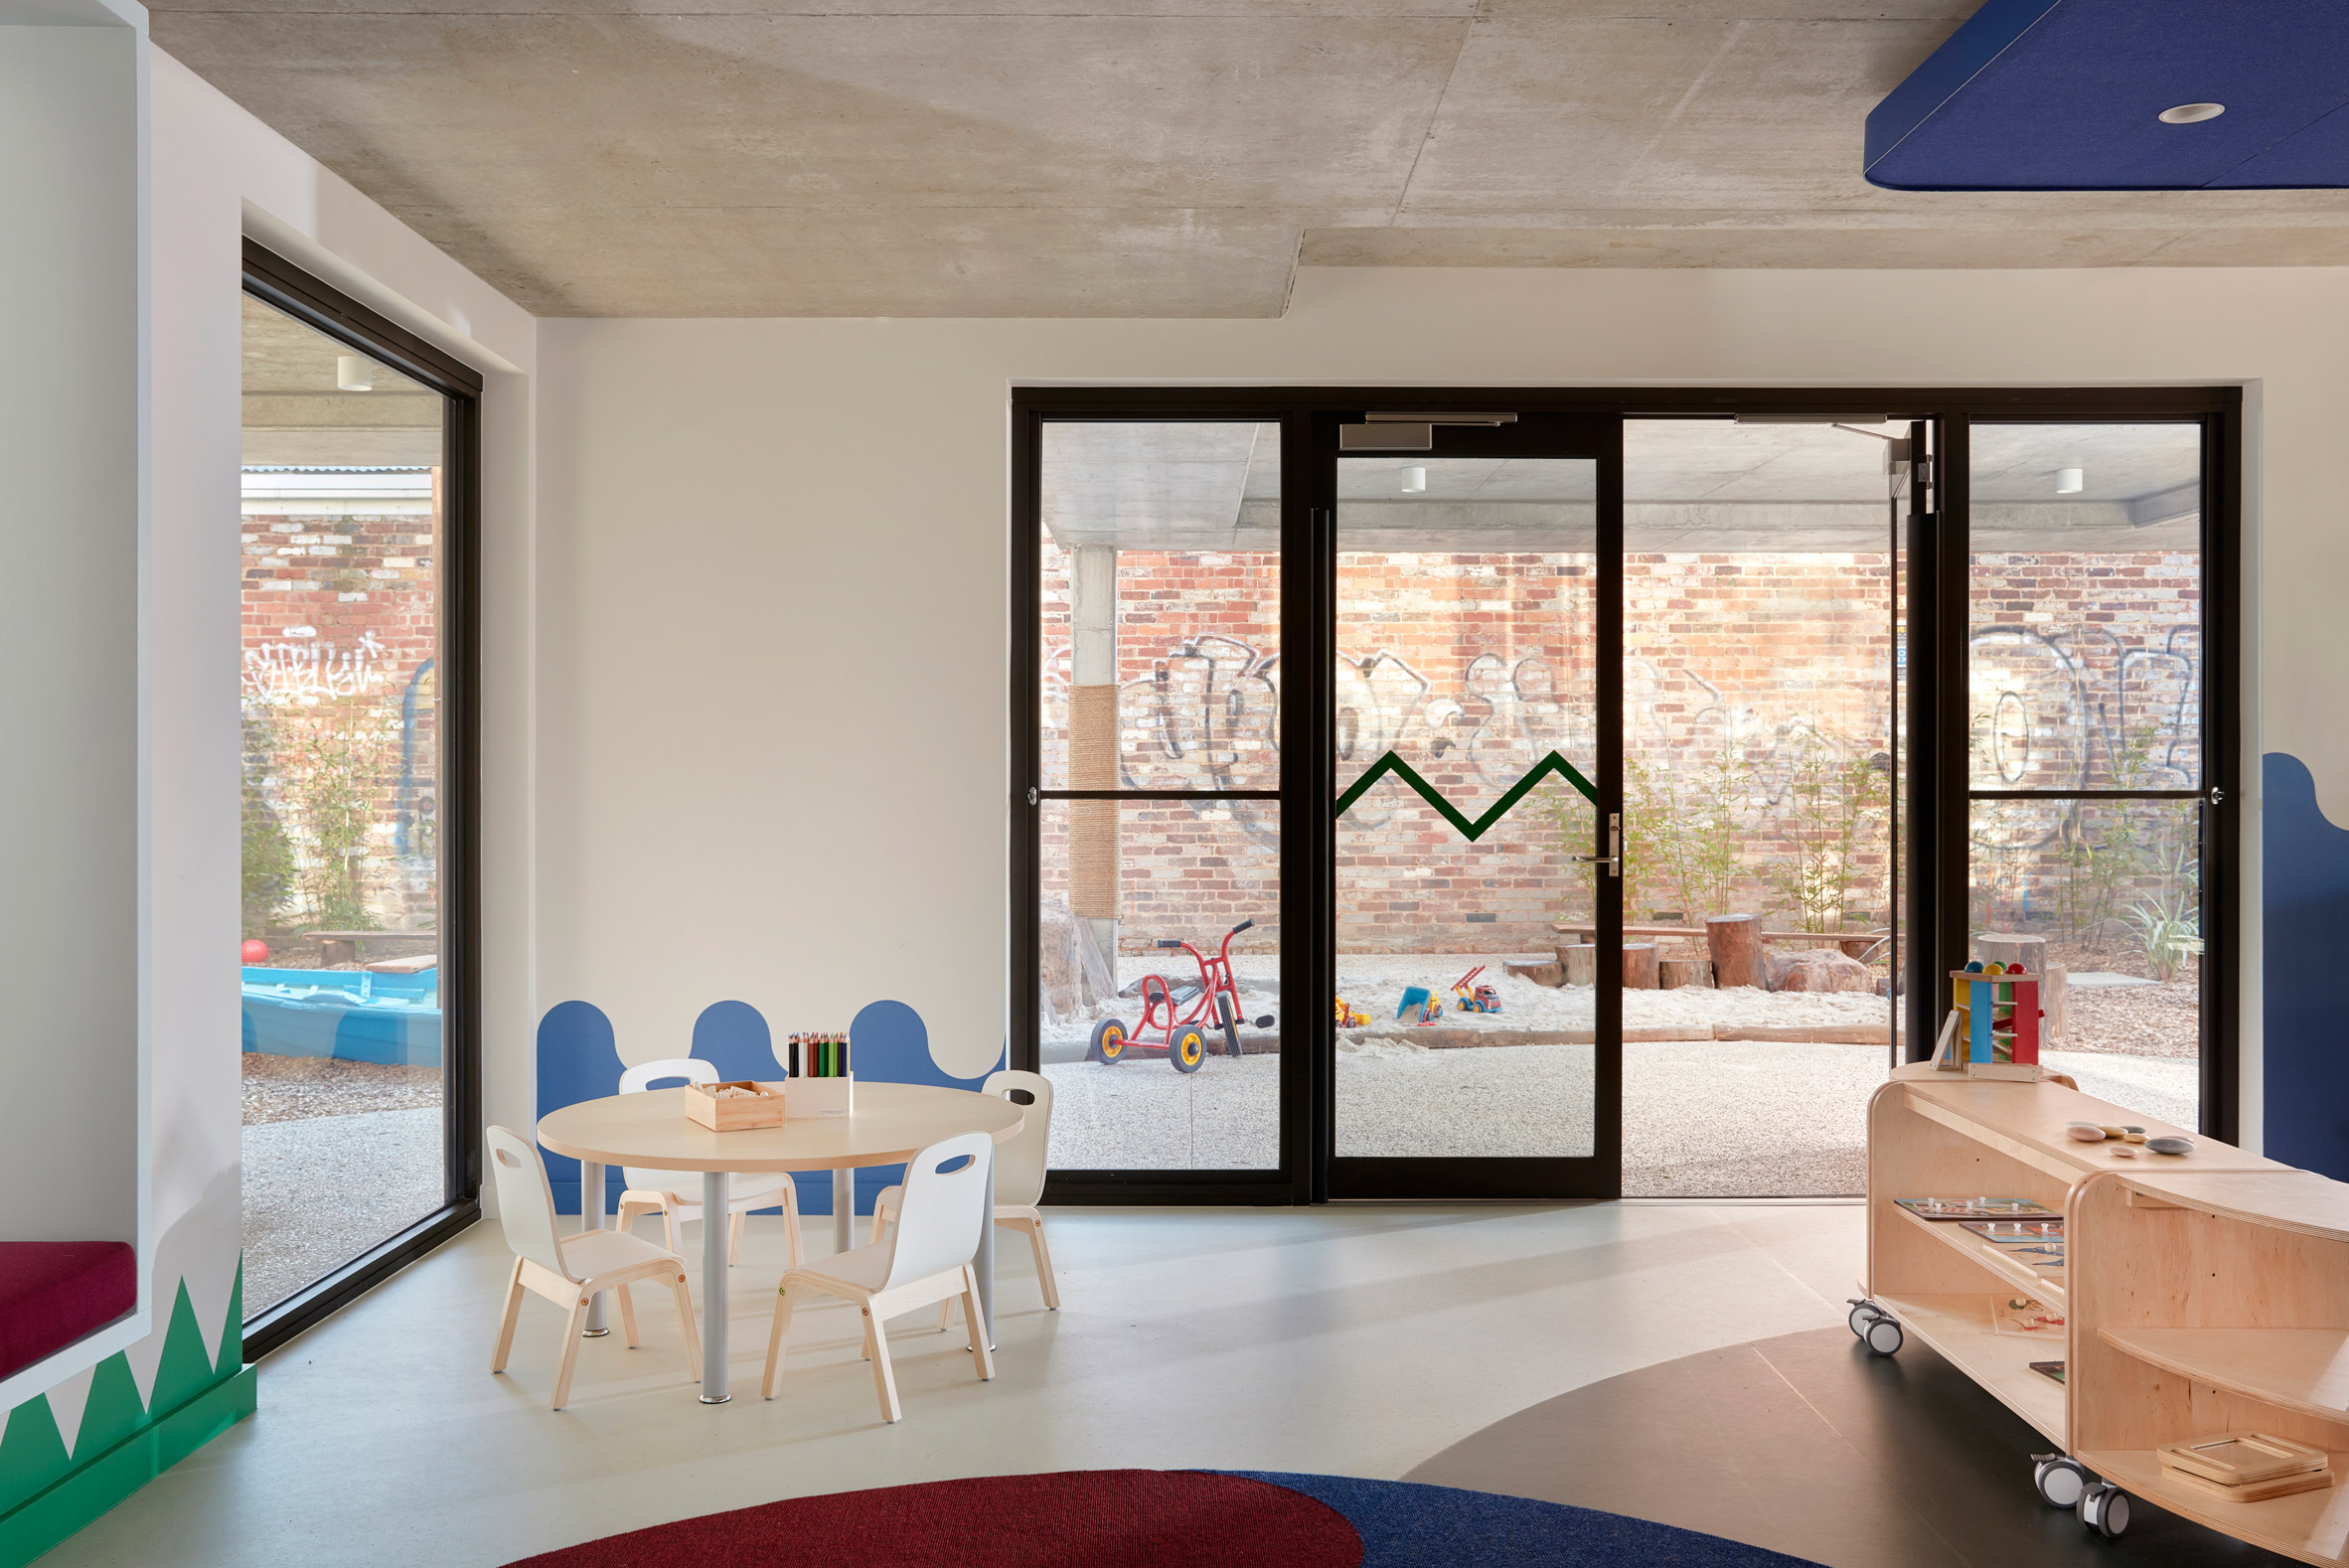 Room in Brighton Early Learning Centre by Danielle Brustman